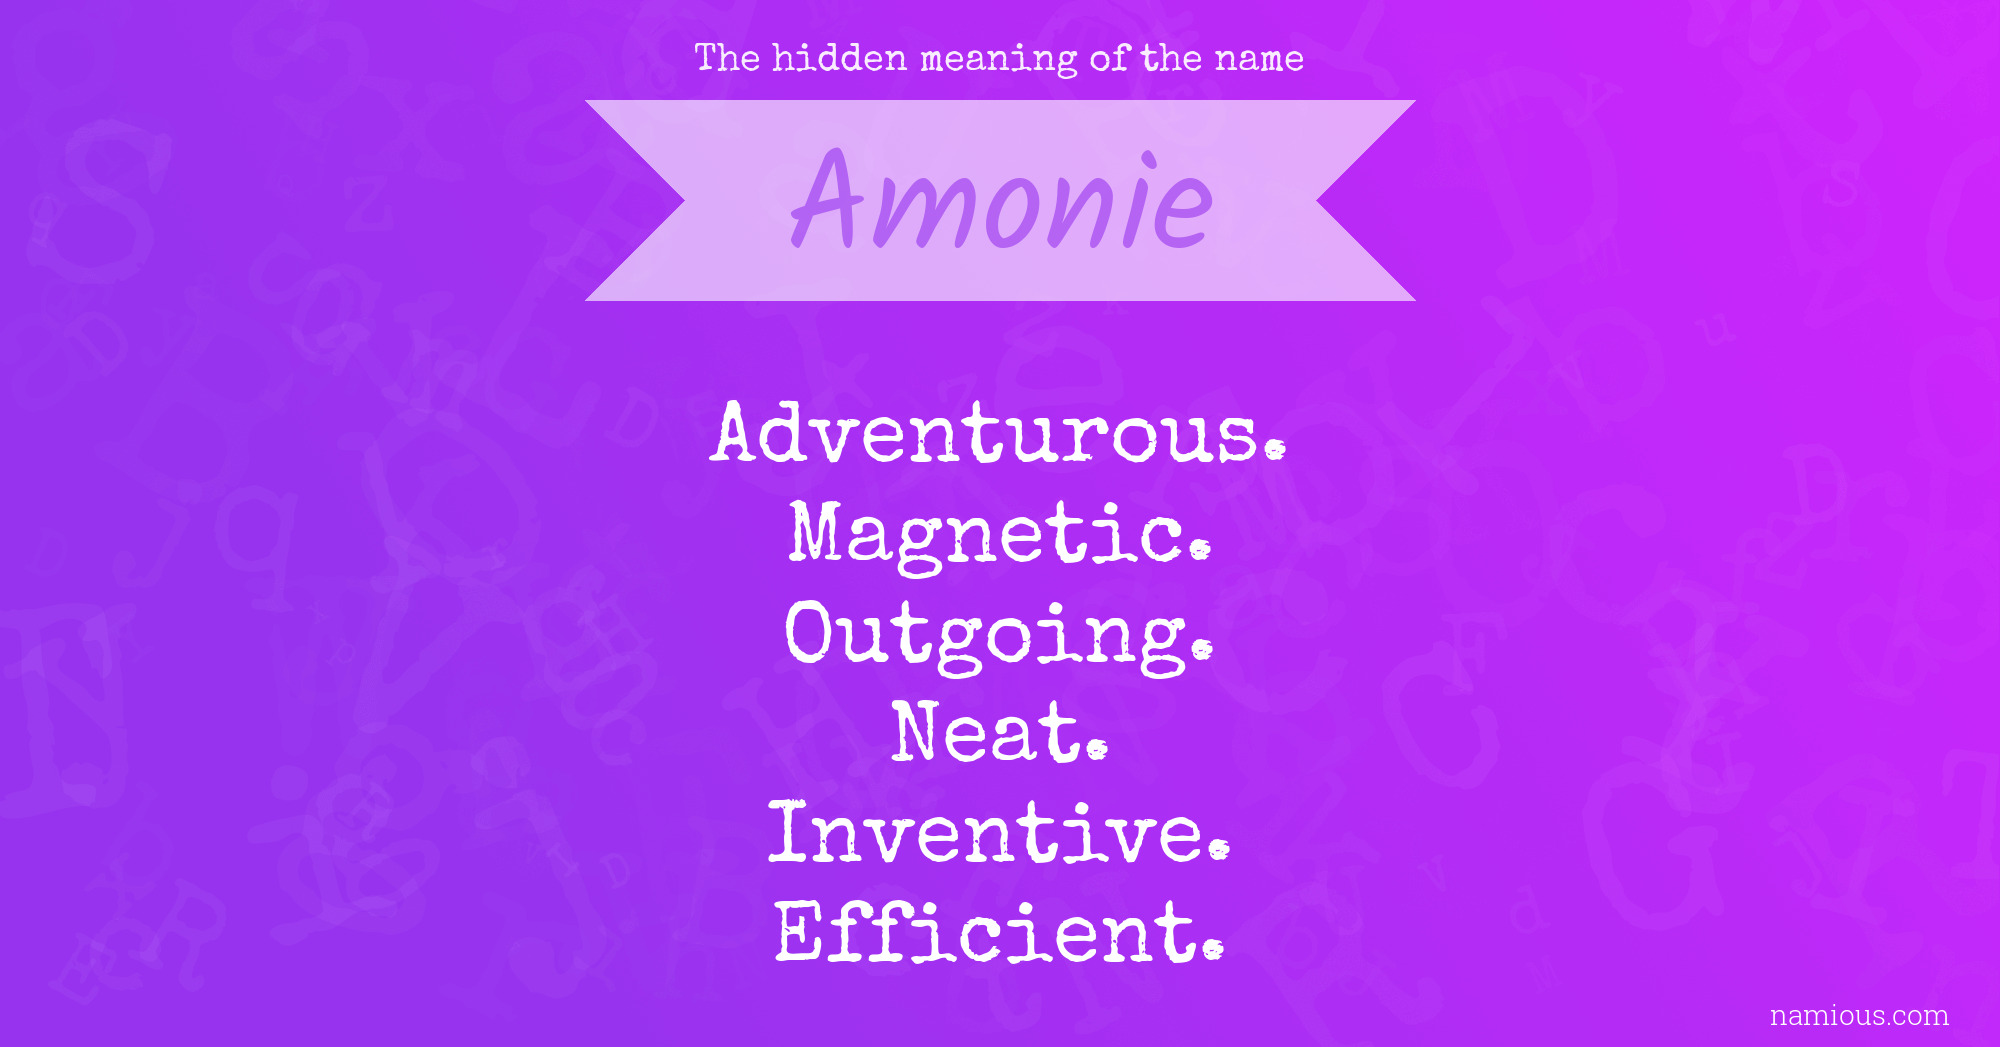 The hidden meaning of the name Amonie